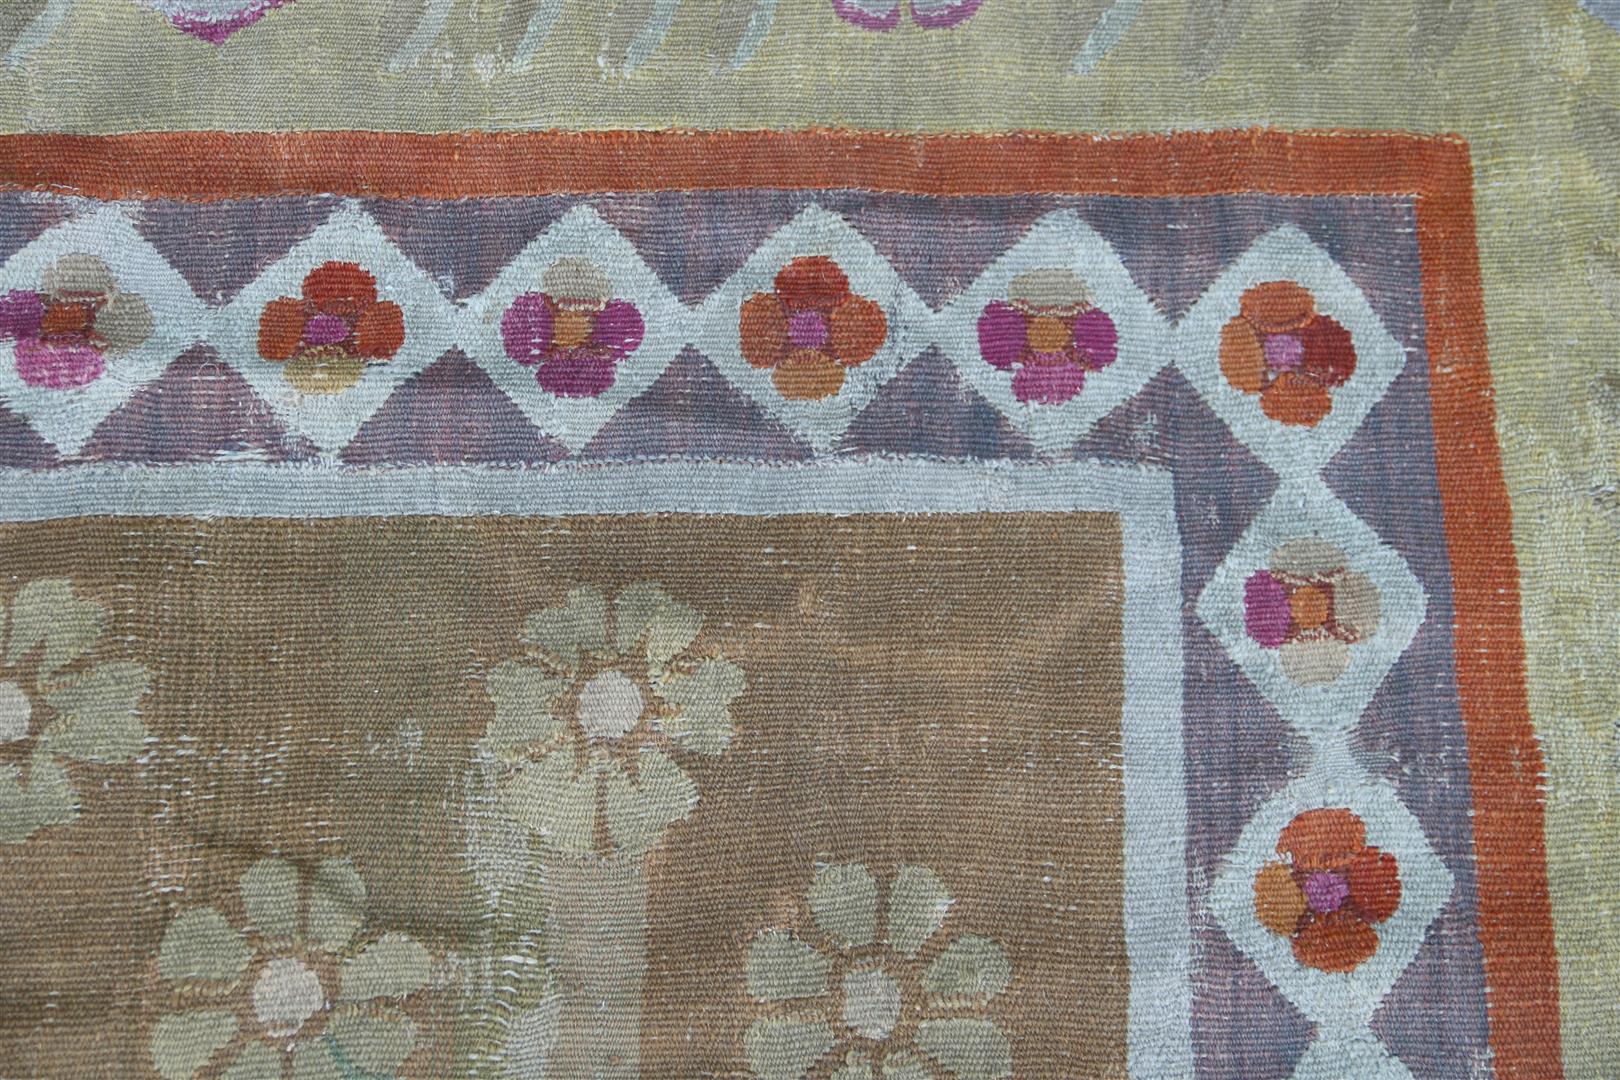 Antique woven tapestry - Image 9 of 10